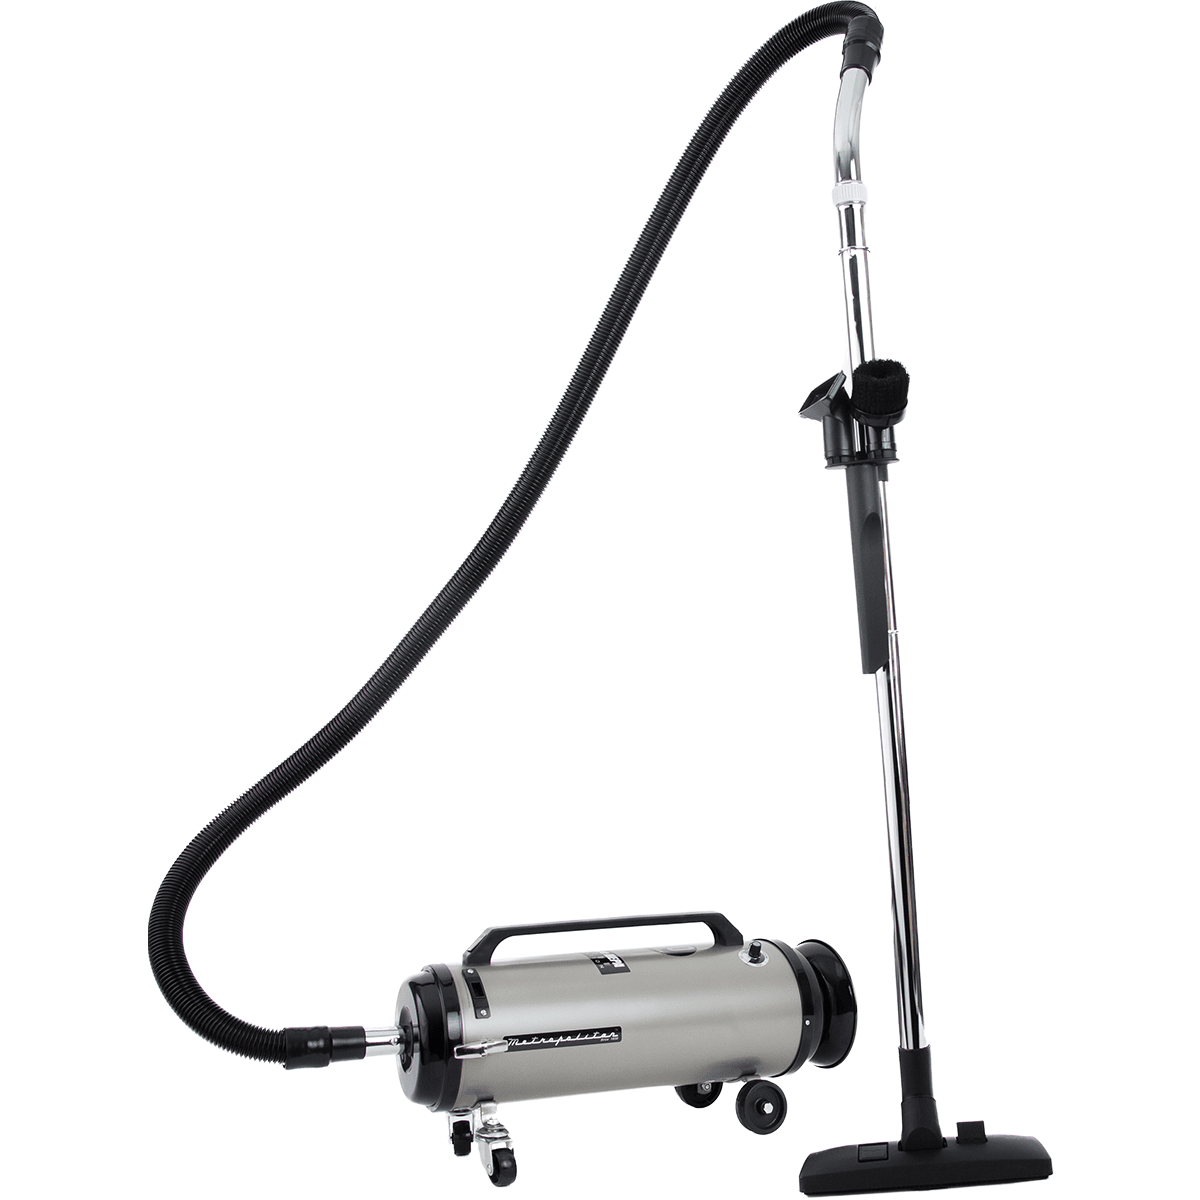 Metrovac Professional Evolution Variable Speed Full-size Canister Vacuum